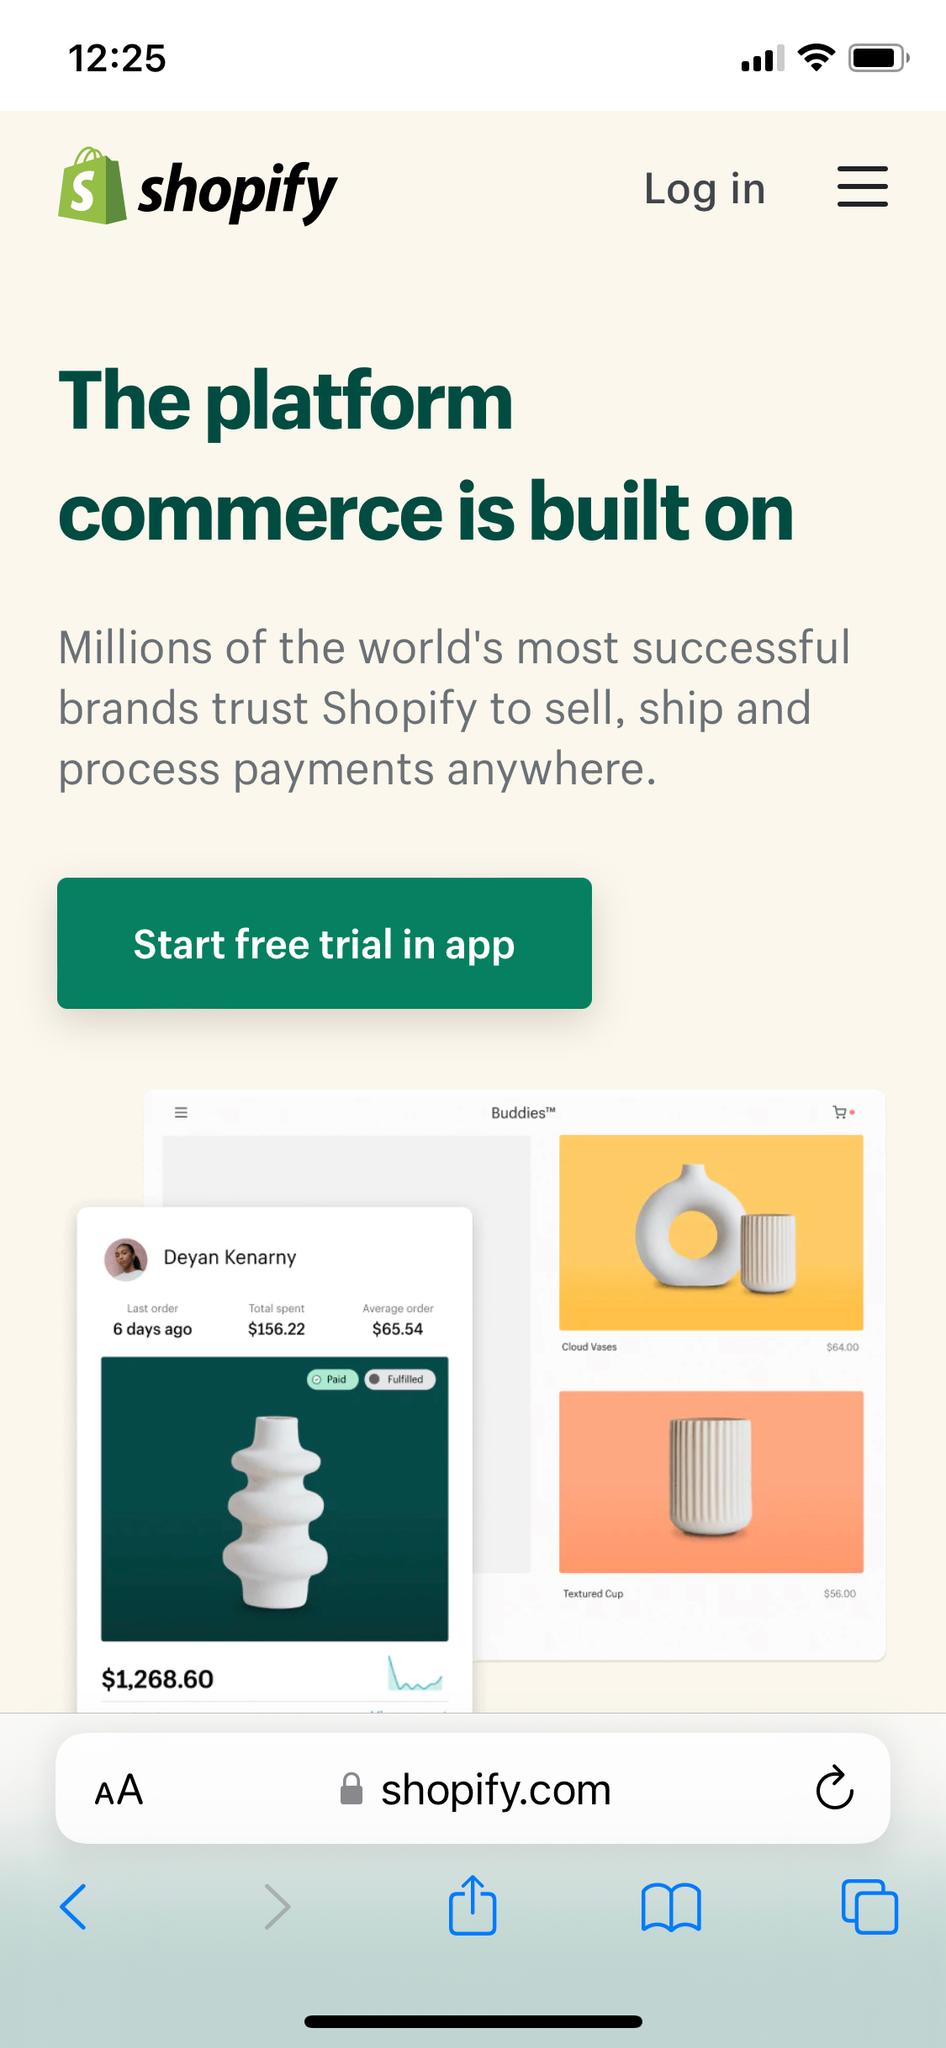 #Screenshot of Shopify’s mobile site
Source: Shopify 